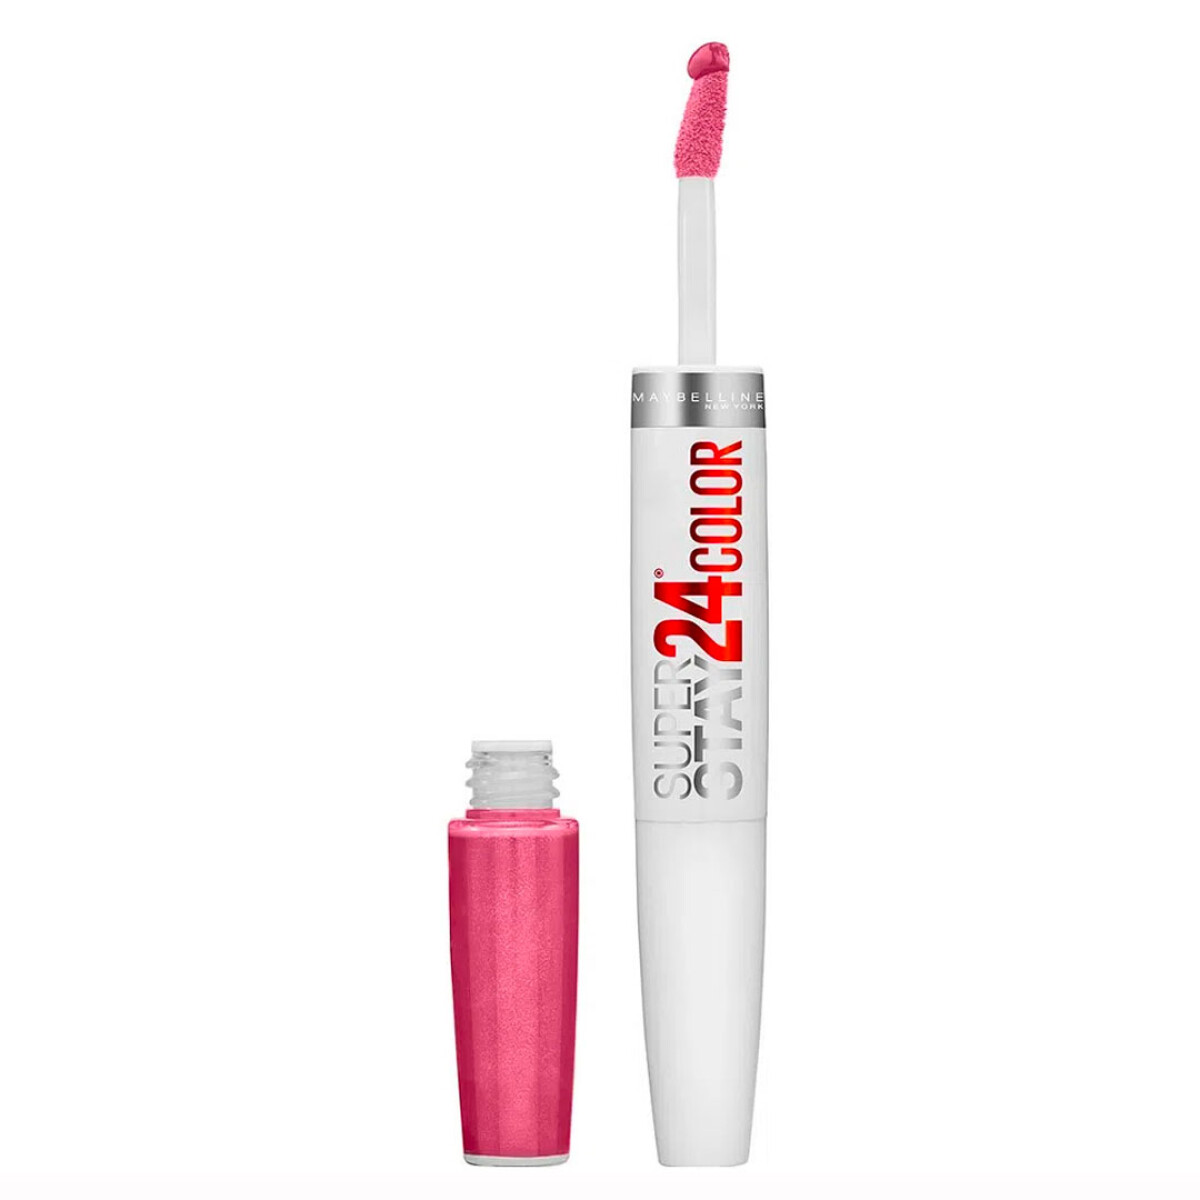 Maybelline Labial Liquido Superstay 24 hrs - Very Cranberry nº100 